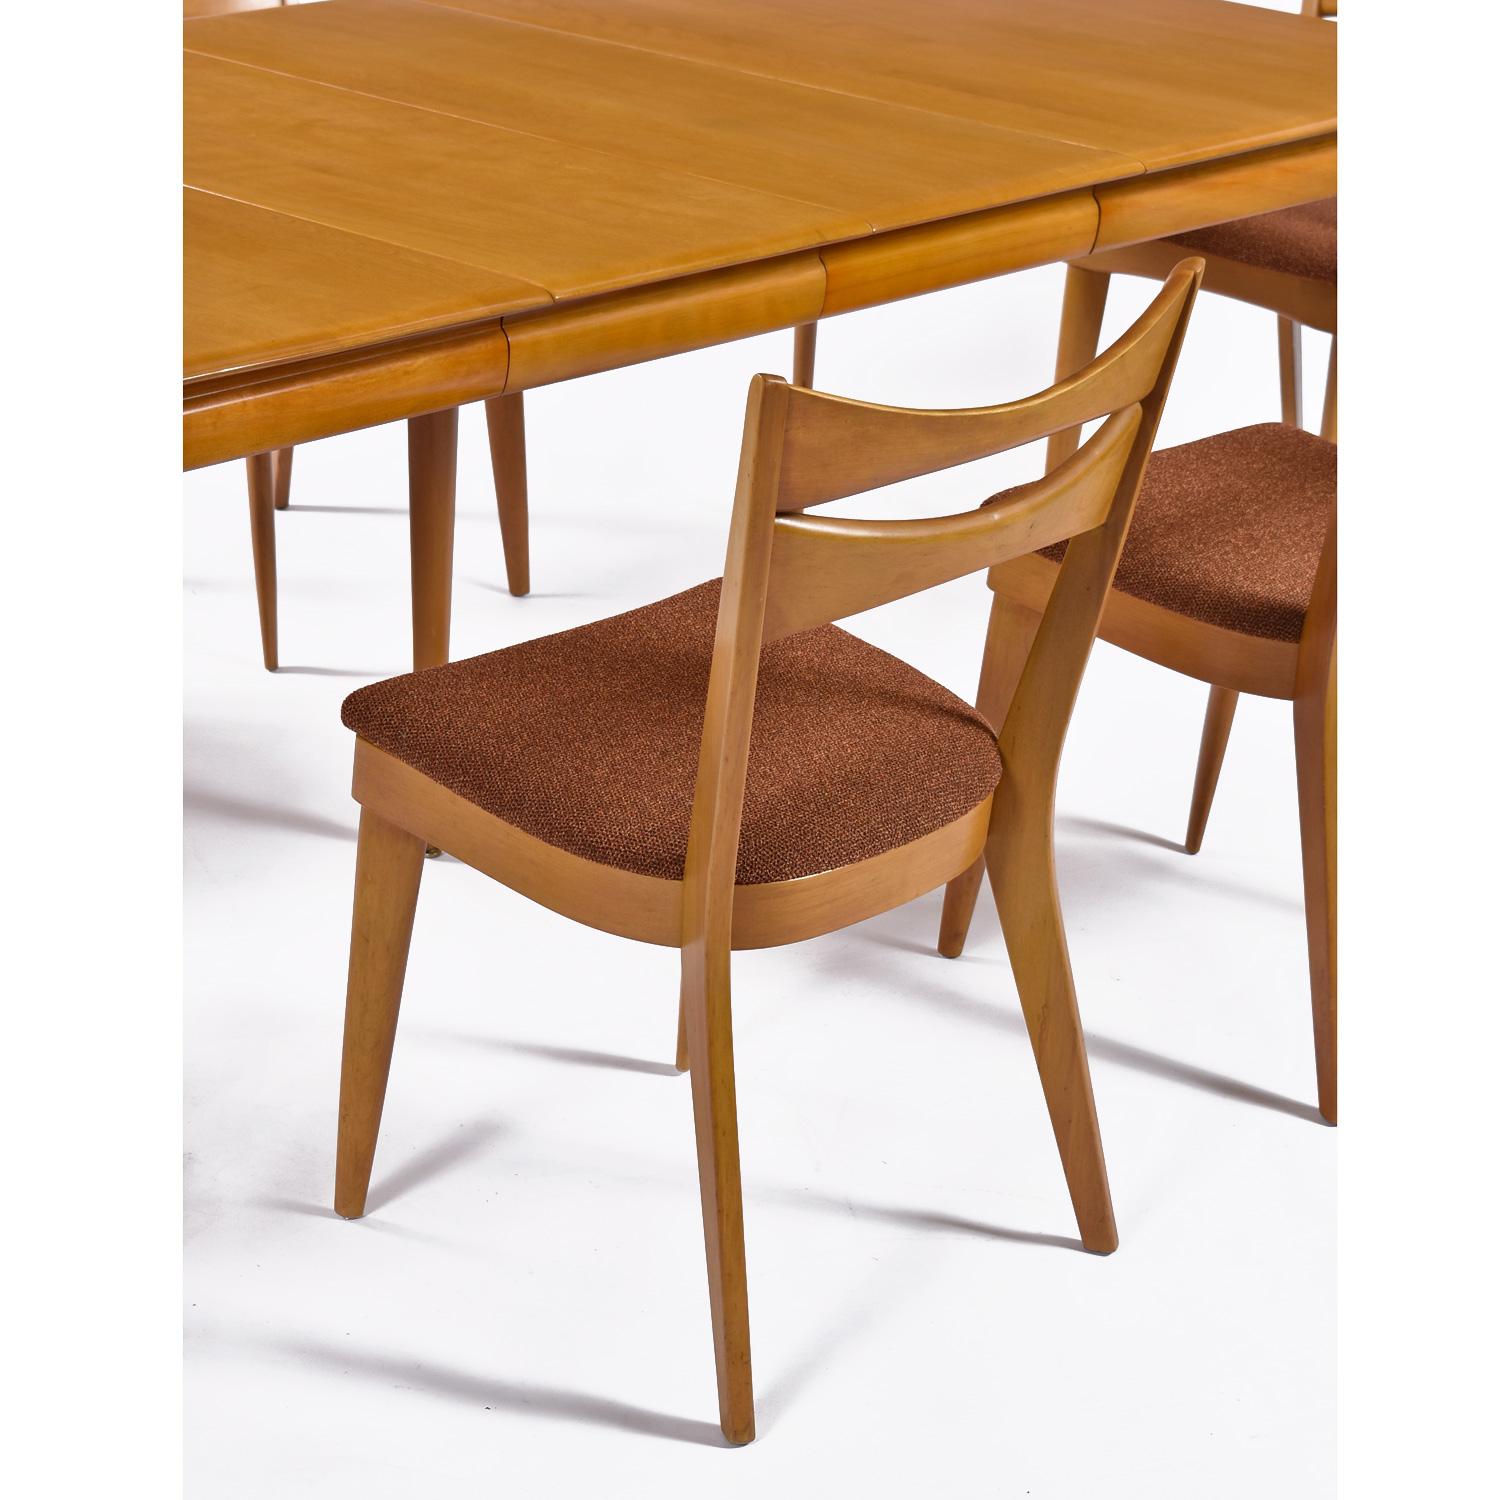 Upholstery Heywood Wakefield Dining Table Set with '6' M1553 Cat’s Eye Dining Chairs